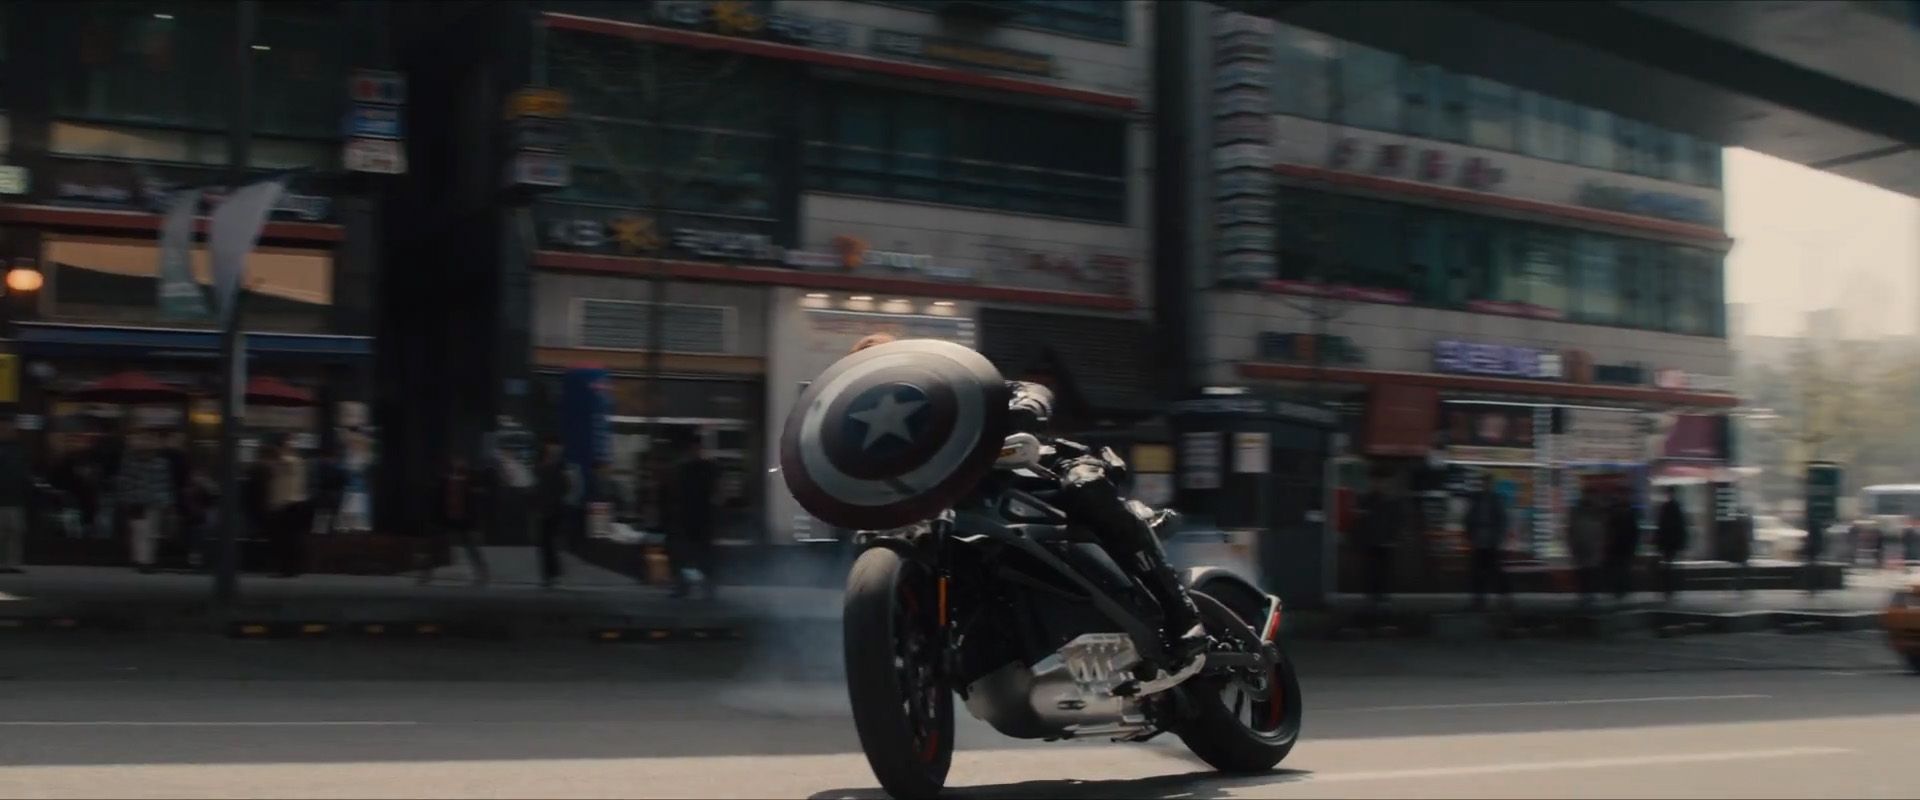 Avengers: Age of Ultron Trailer 1 - Captain America Motorcycle